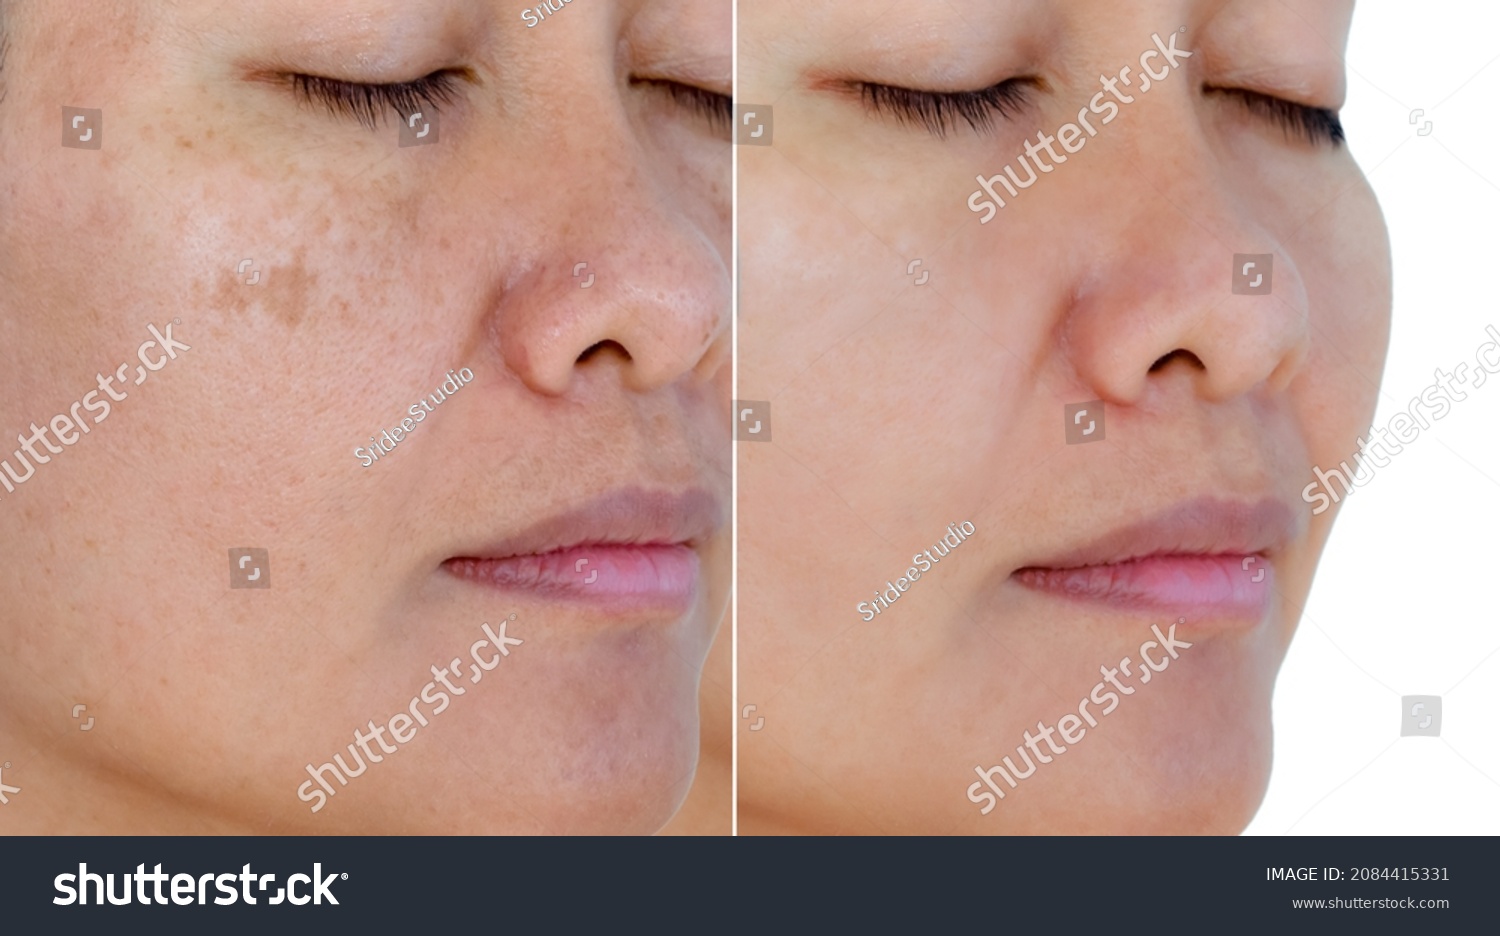 Image before and after spot melasma pigmentation facial treatment on middle age asian woman face. skincare and health problem concept.  #2084415331